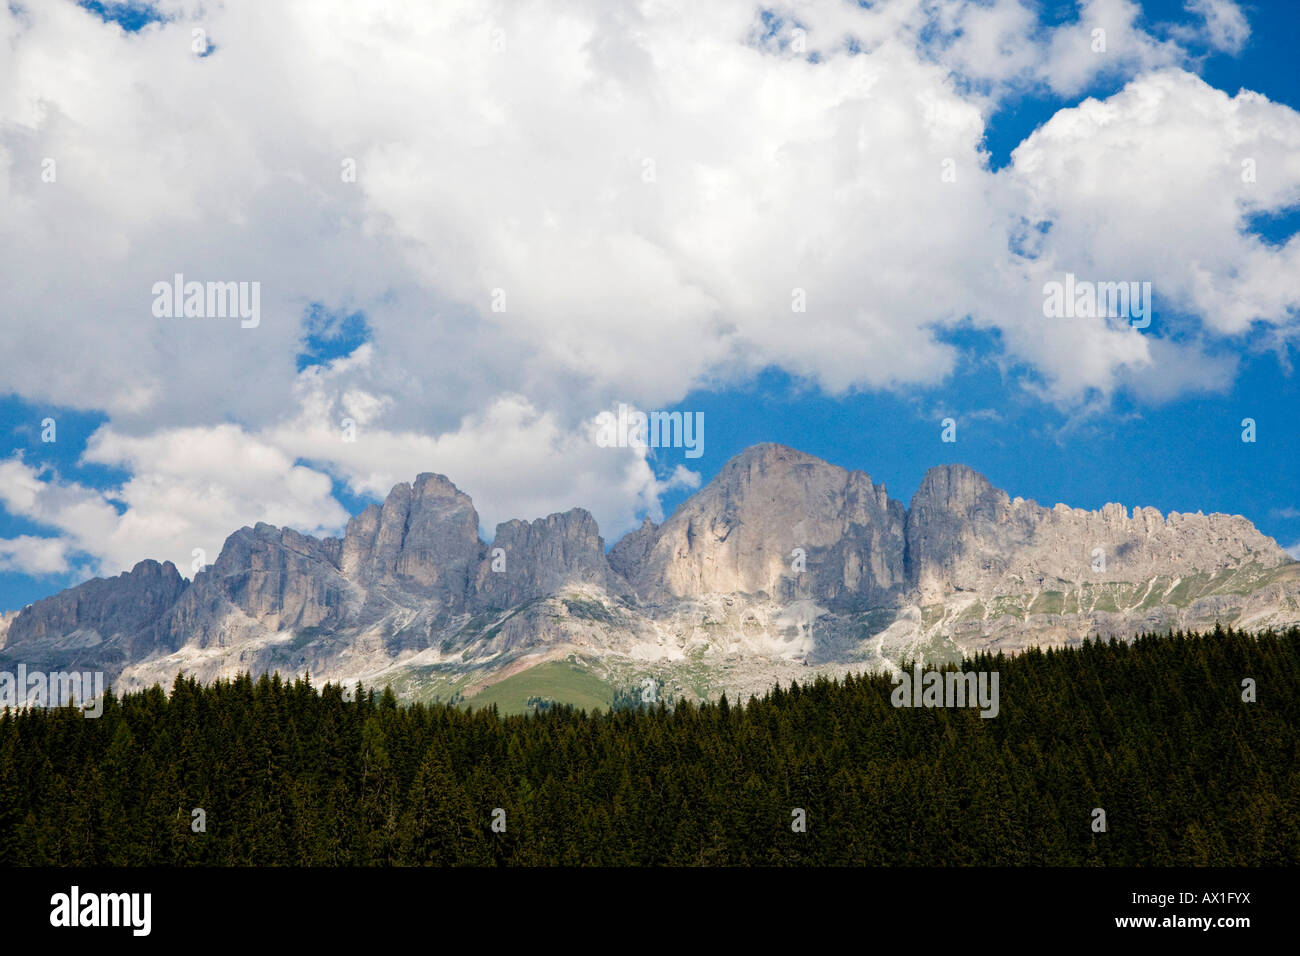 Ital High Stock Photography Images - Alamy